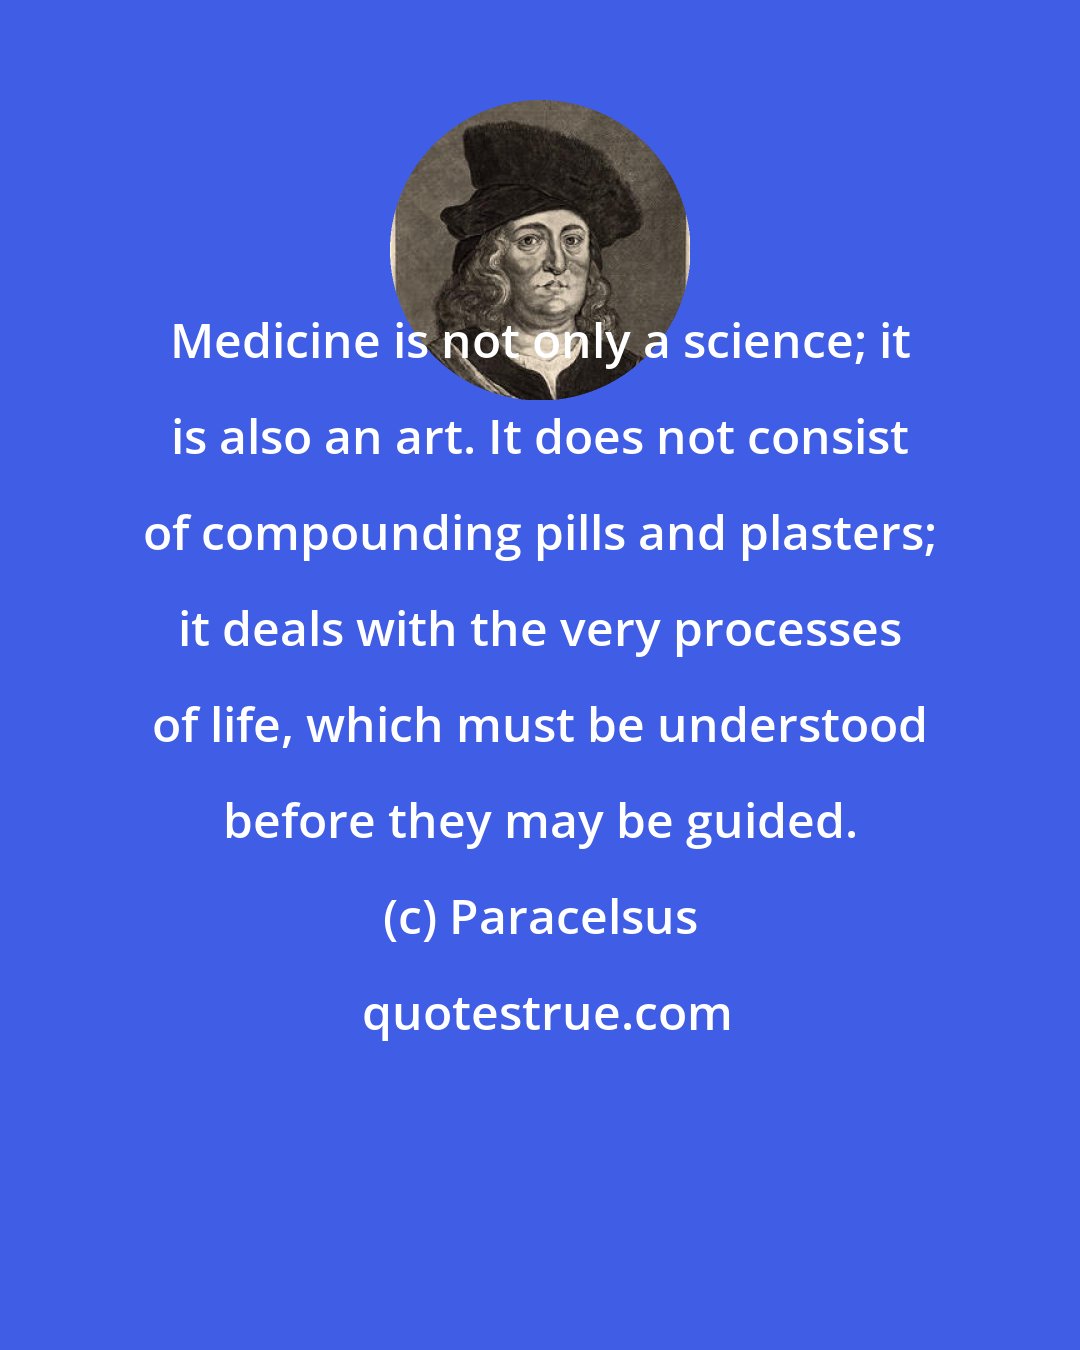 Paracelsus: Medicine is not only a science; it is also an art. It does not consist of compounding pills and plasters; it deals with the very processes of life, which must be understood before they may be guided.